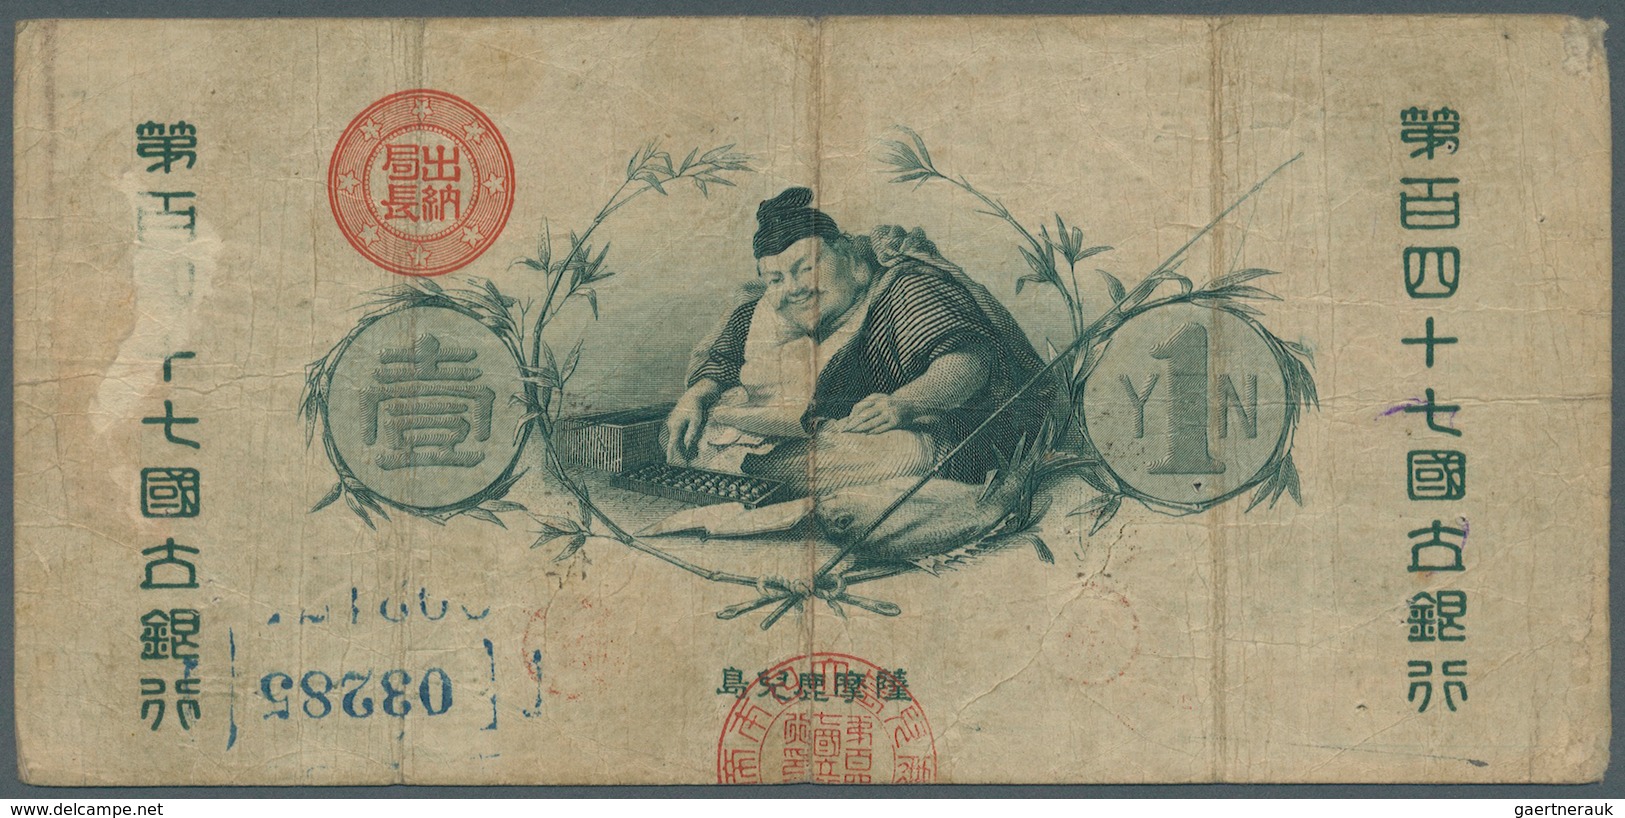 Japan: 1 Yen ND (1877) P. 20. This Early Issue From The "Great Imperial Japanese National Bank" Is U - Japan